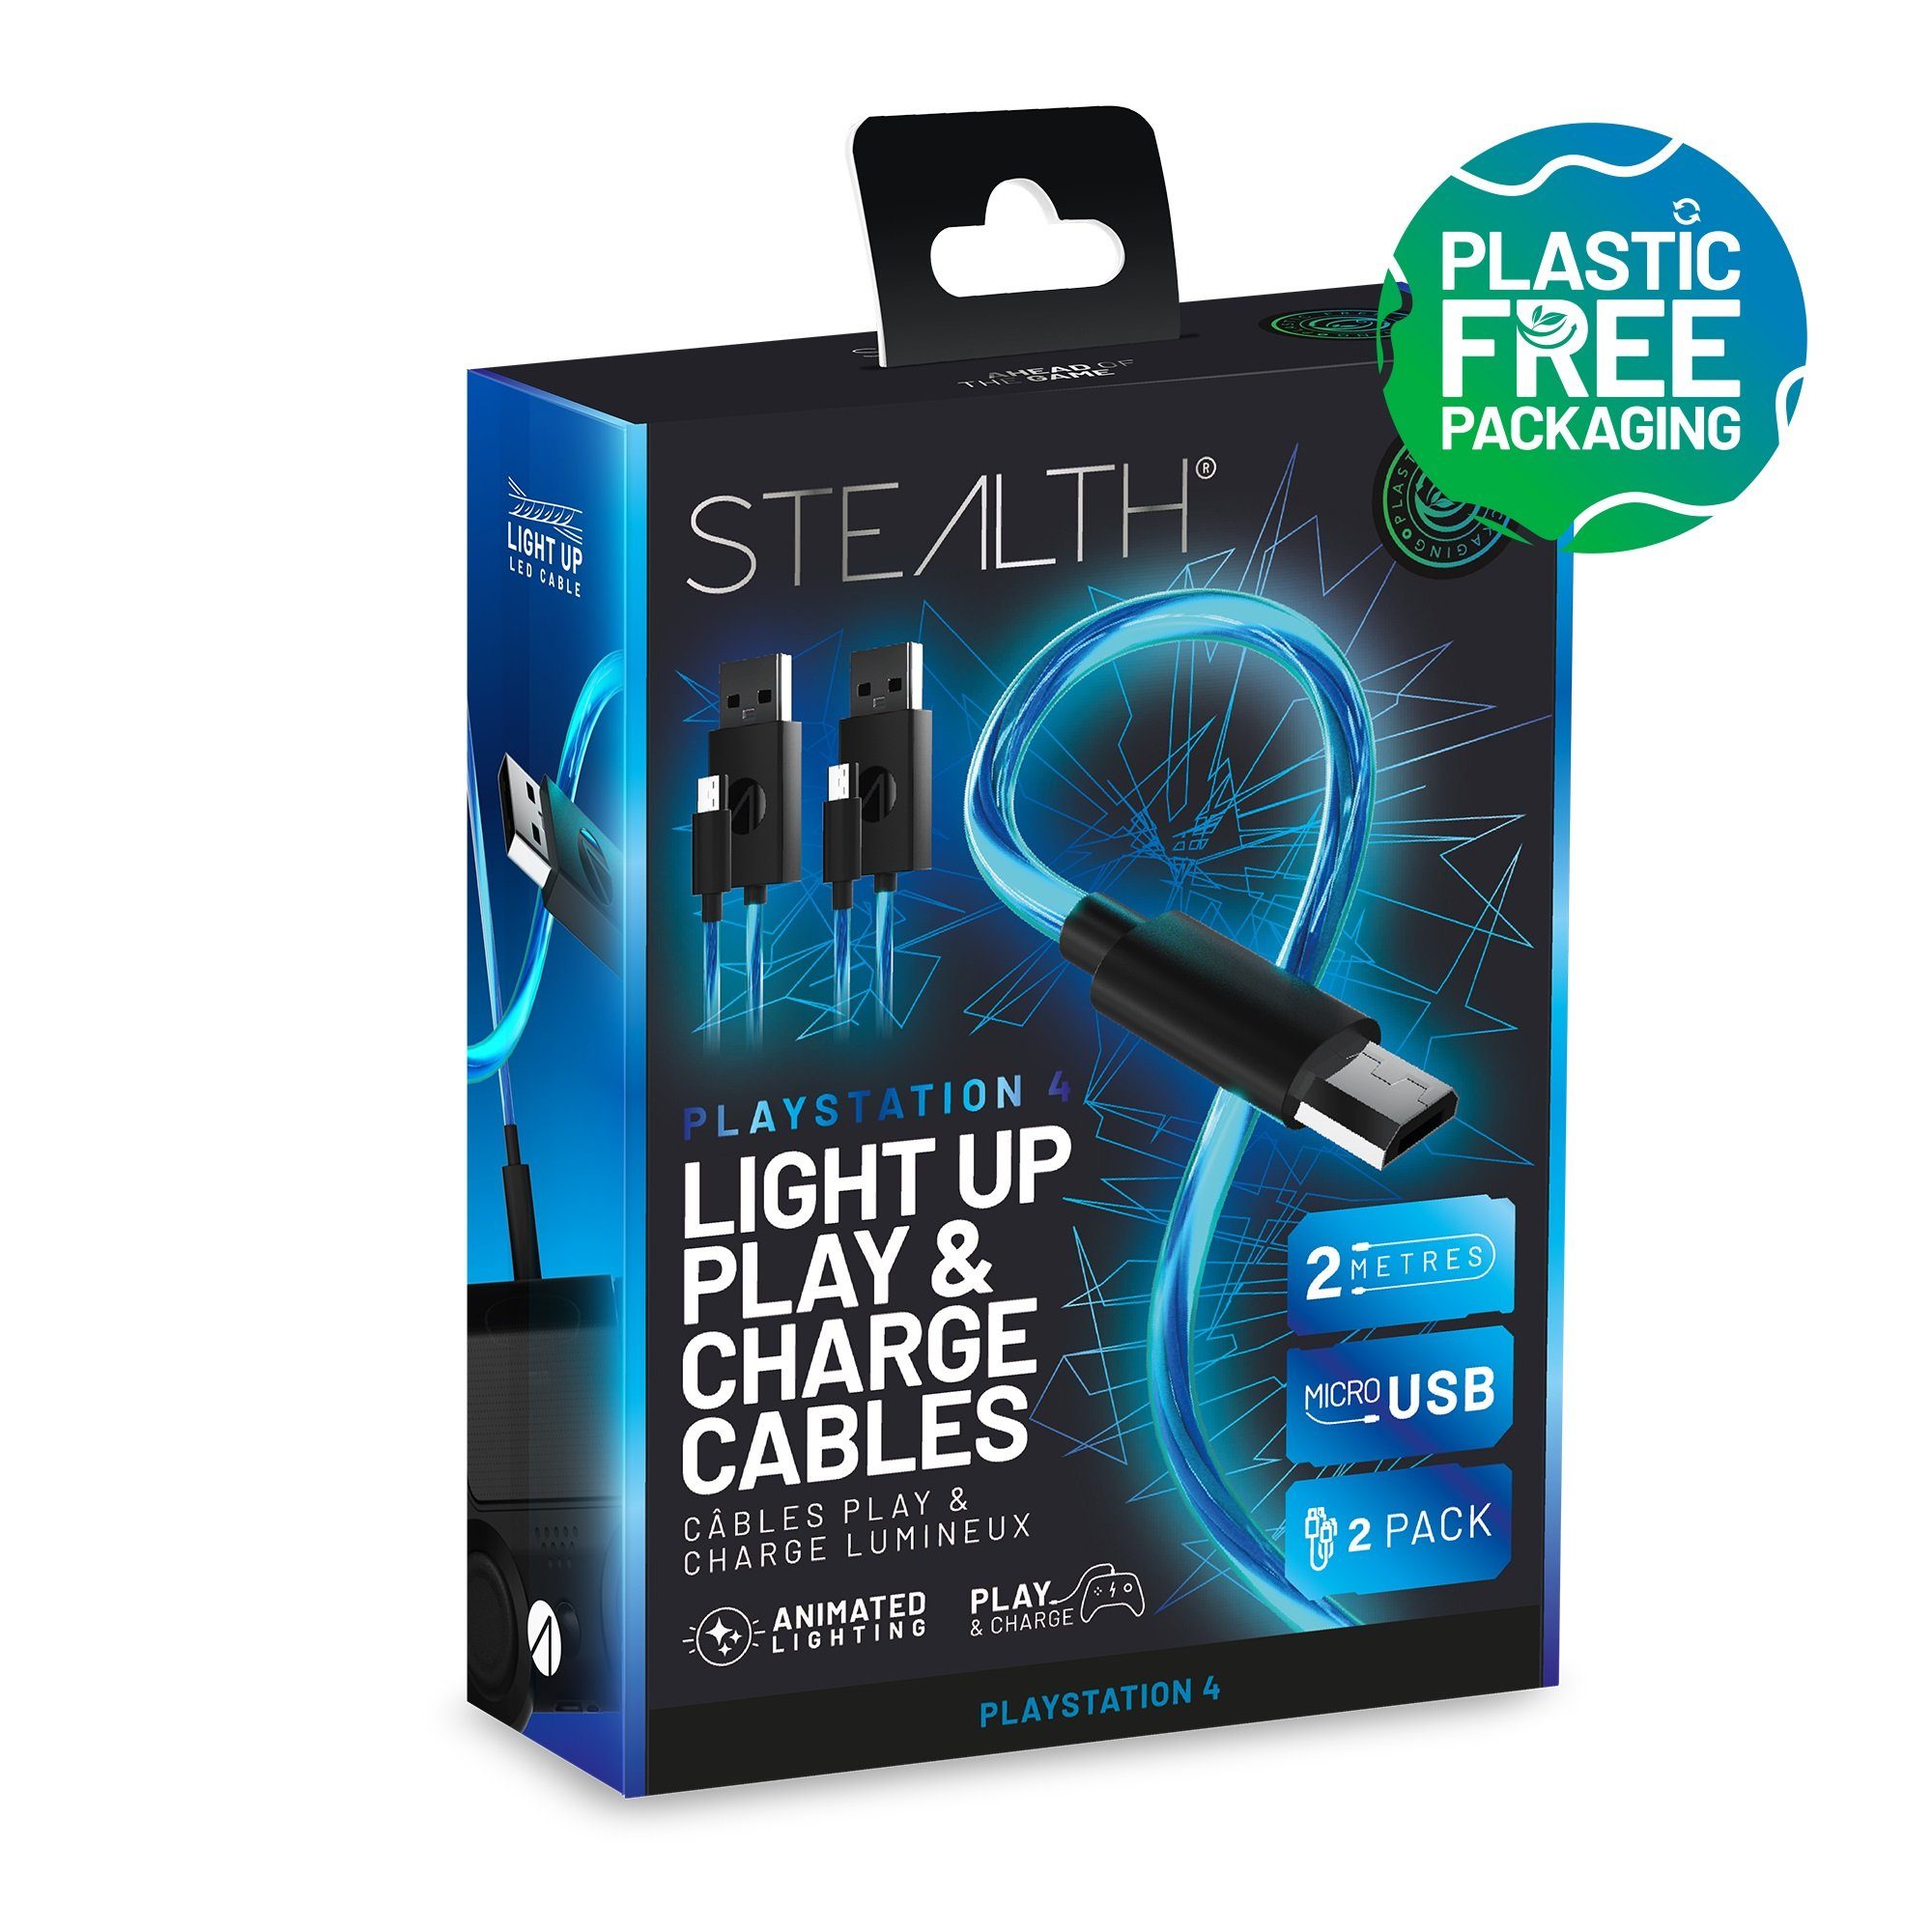 Stealth USB Kabel Doppelpack (2x 2m) Play&Charge mit LED